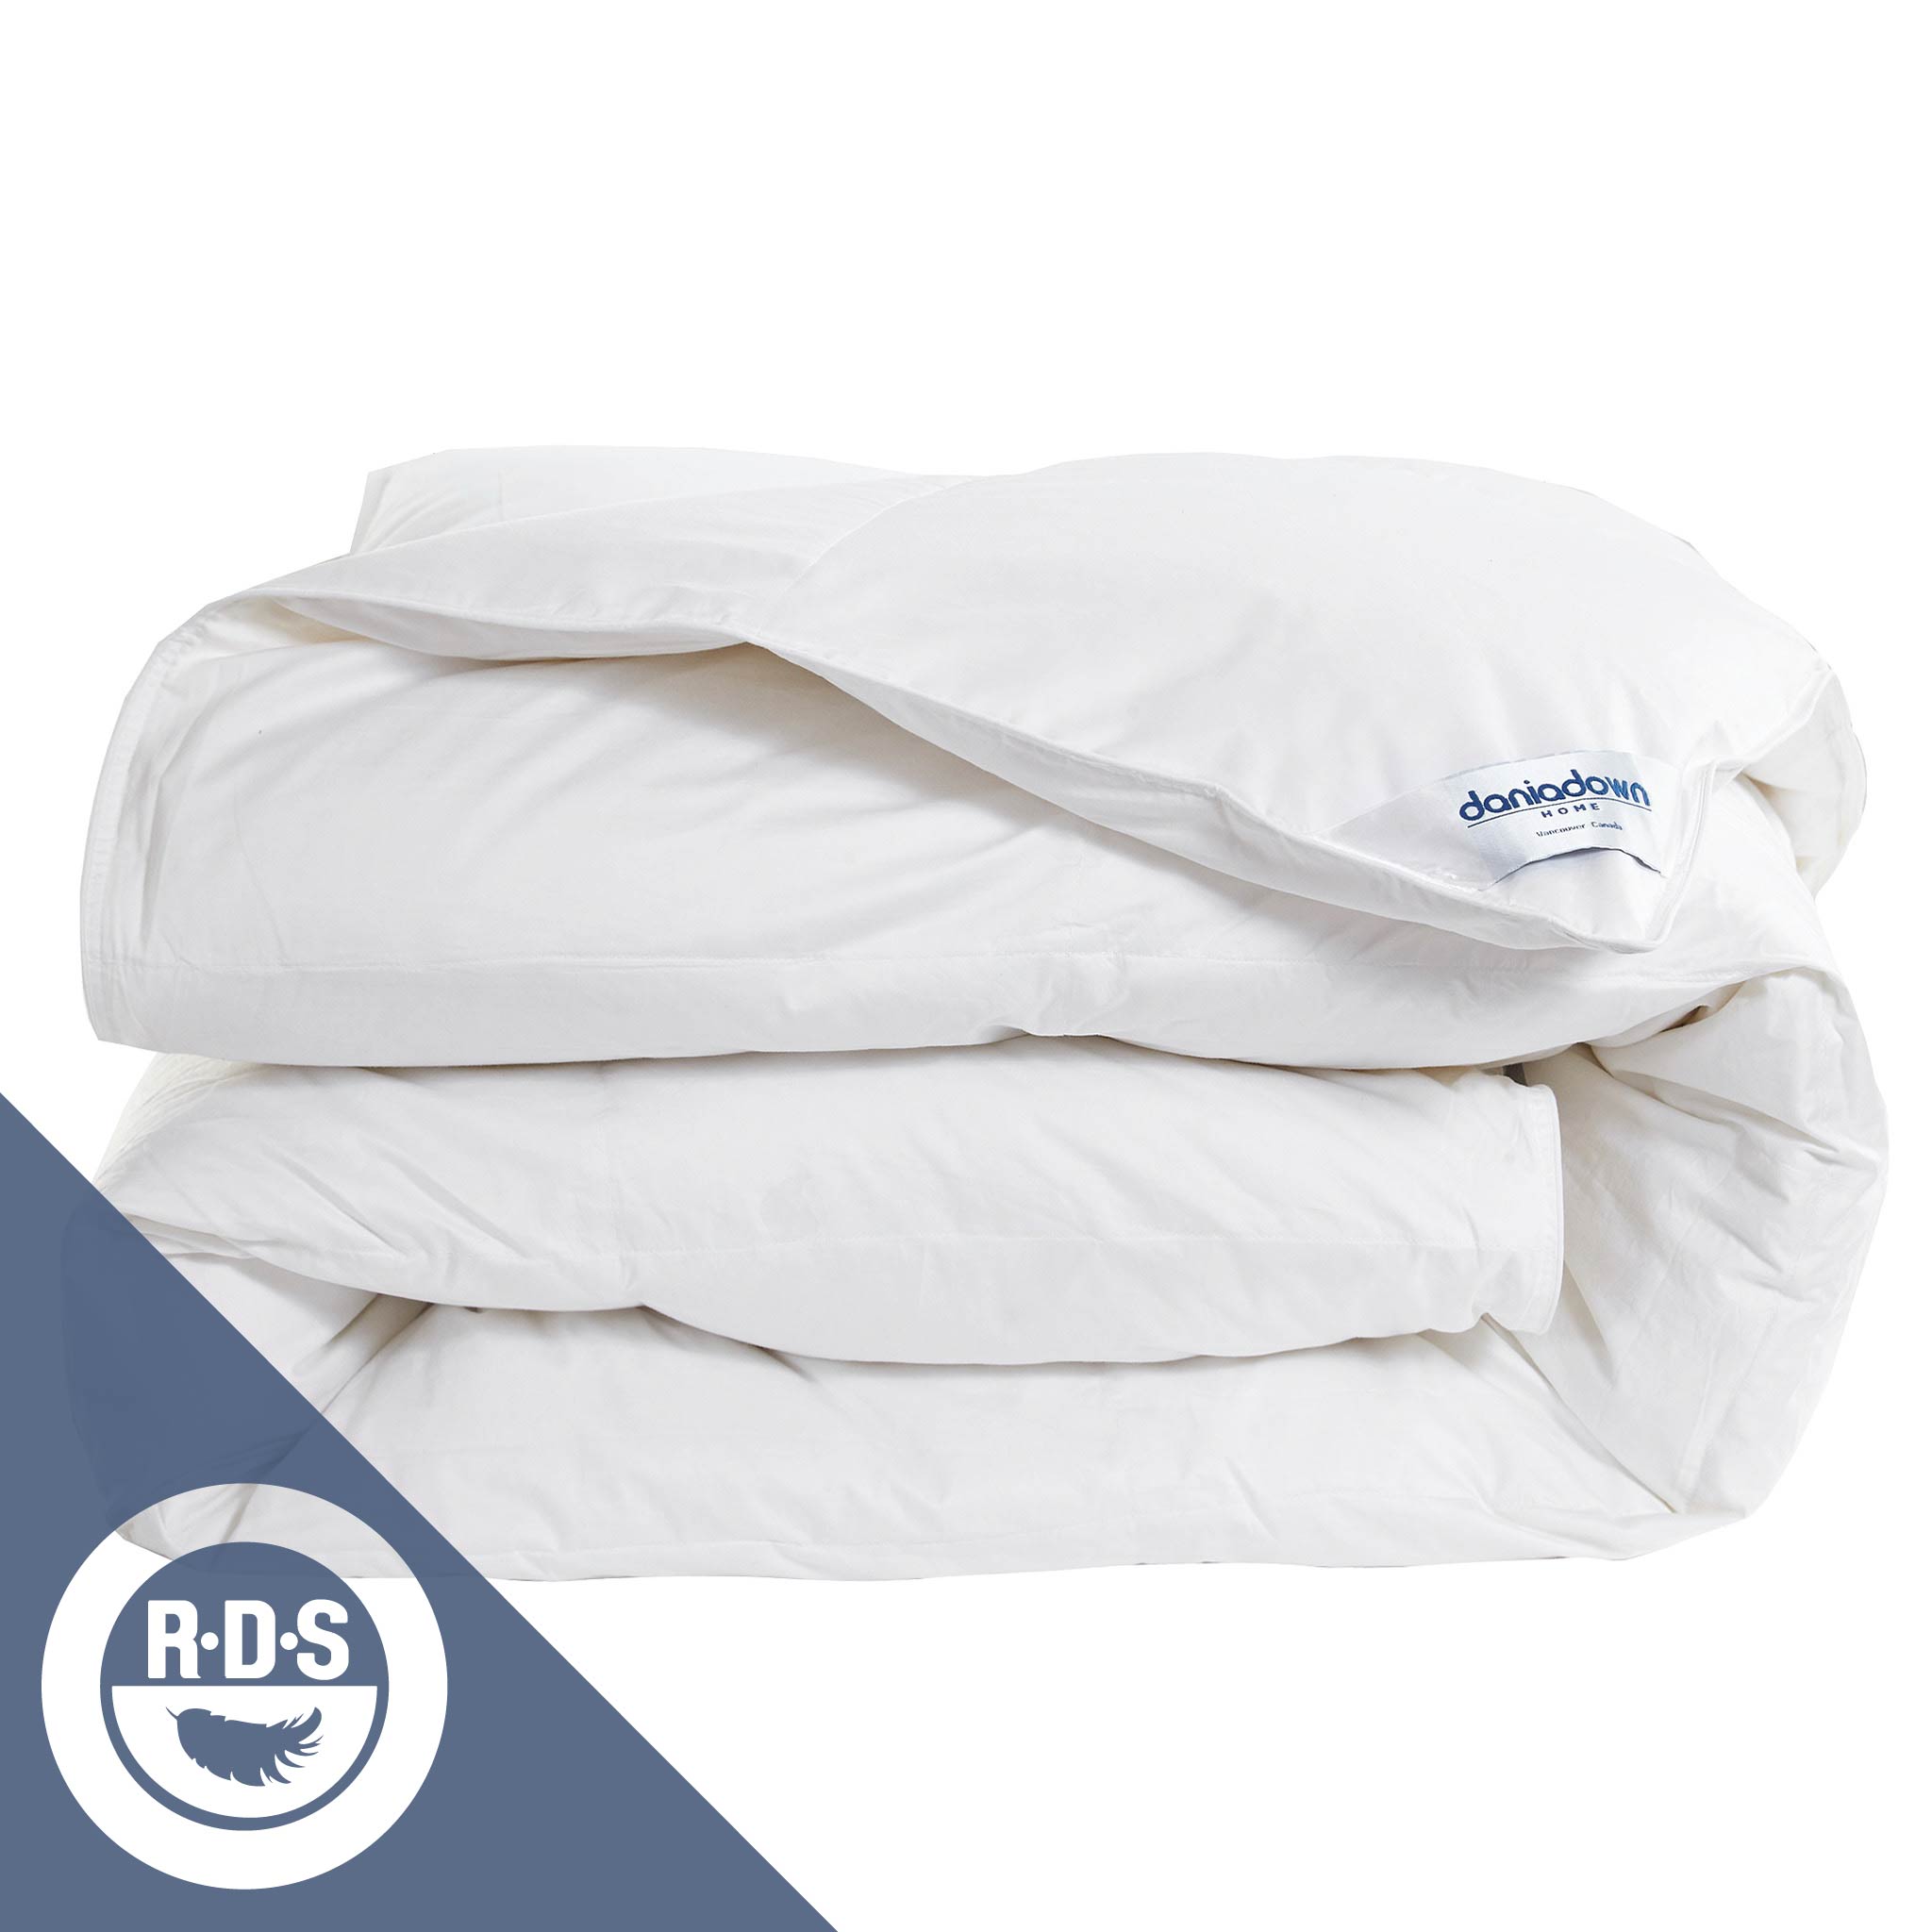 RDS Certified Down Duvets